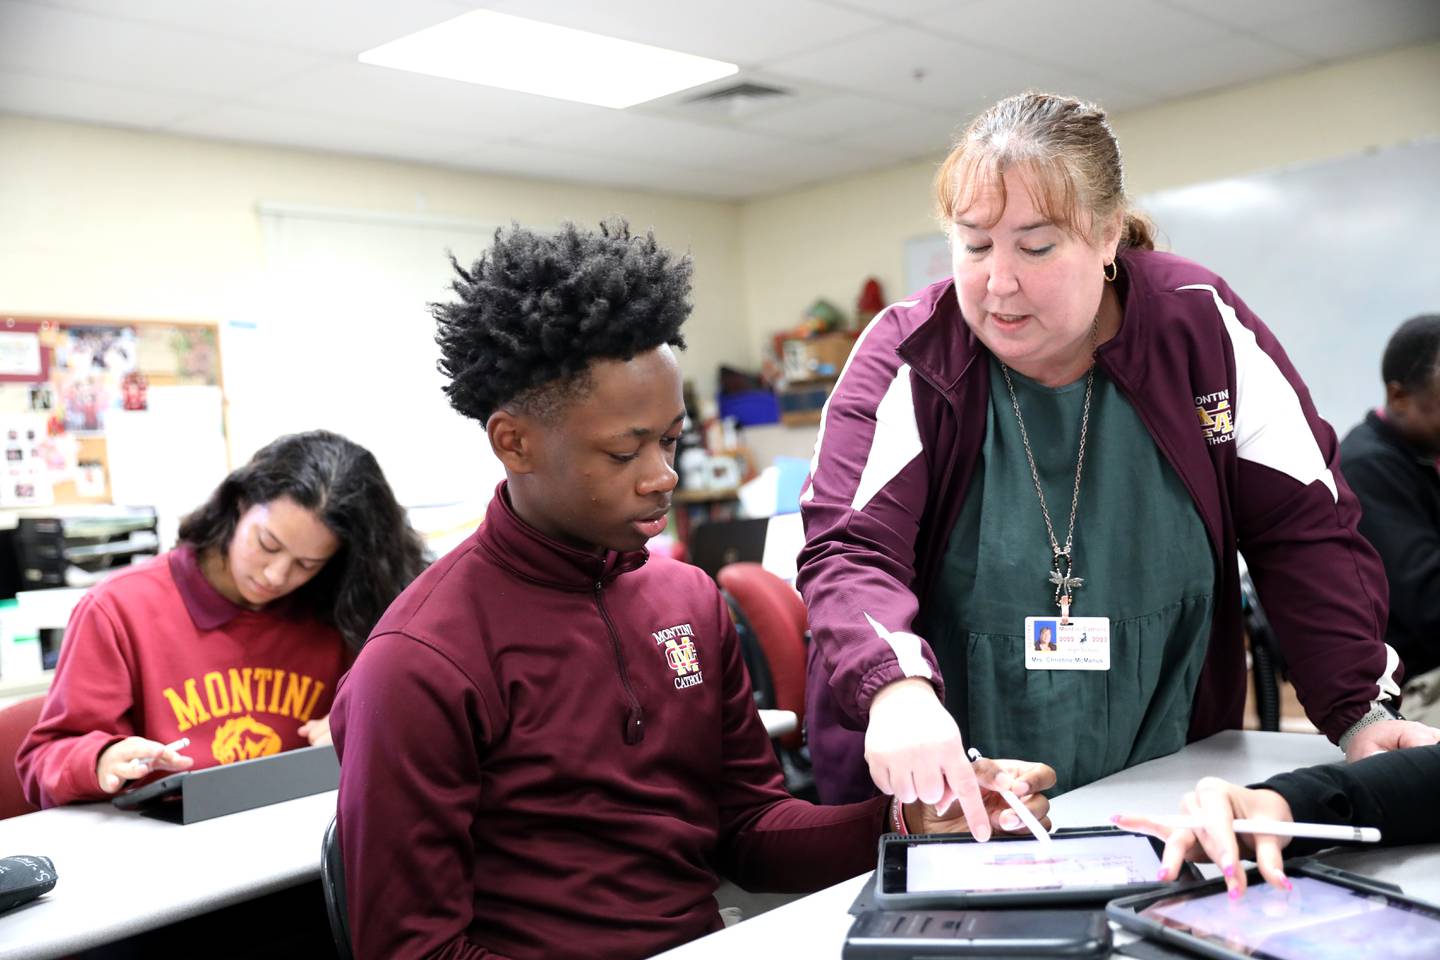 Montini math teacher Chrissy McManus teaches an honors algebra II class at the Lombard school. McManus is the staff sponsor of the Montini math team, who recently made history by bringing home the school’s first Illinois Council of Teachers of Mathematics Regional Championship trophy.